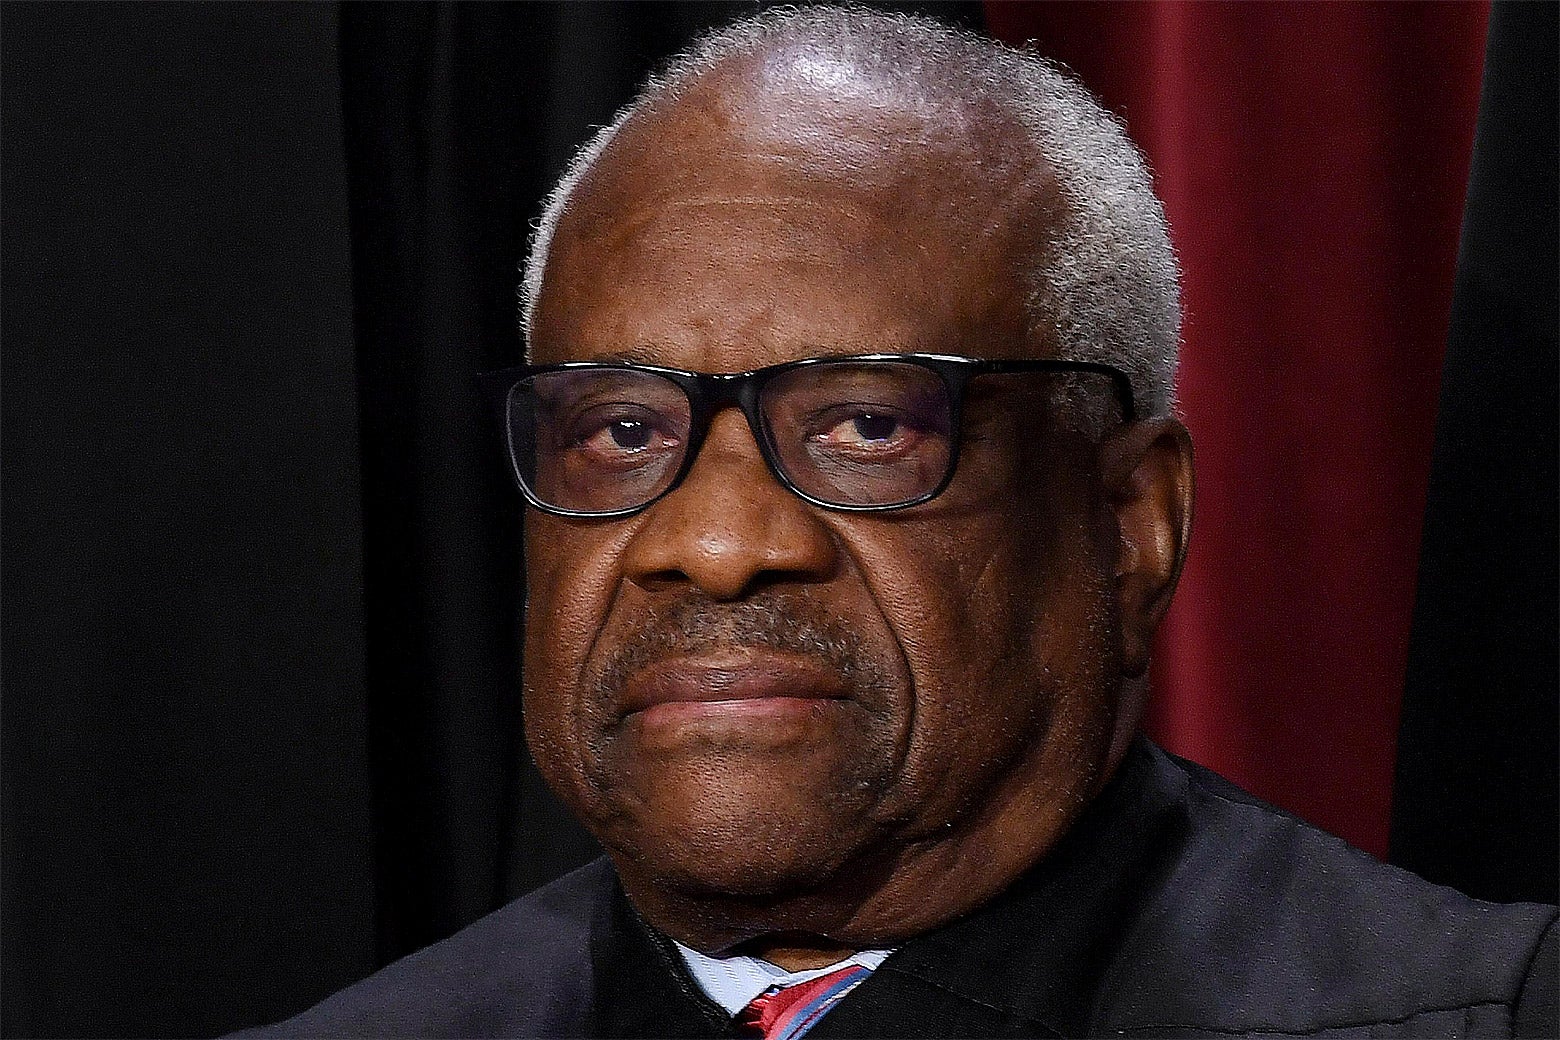 Justice Clarence Thomas in a robe, looking dour.